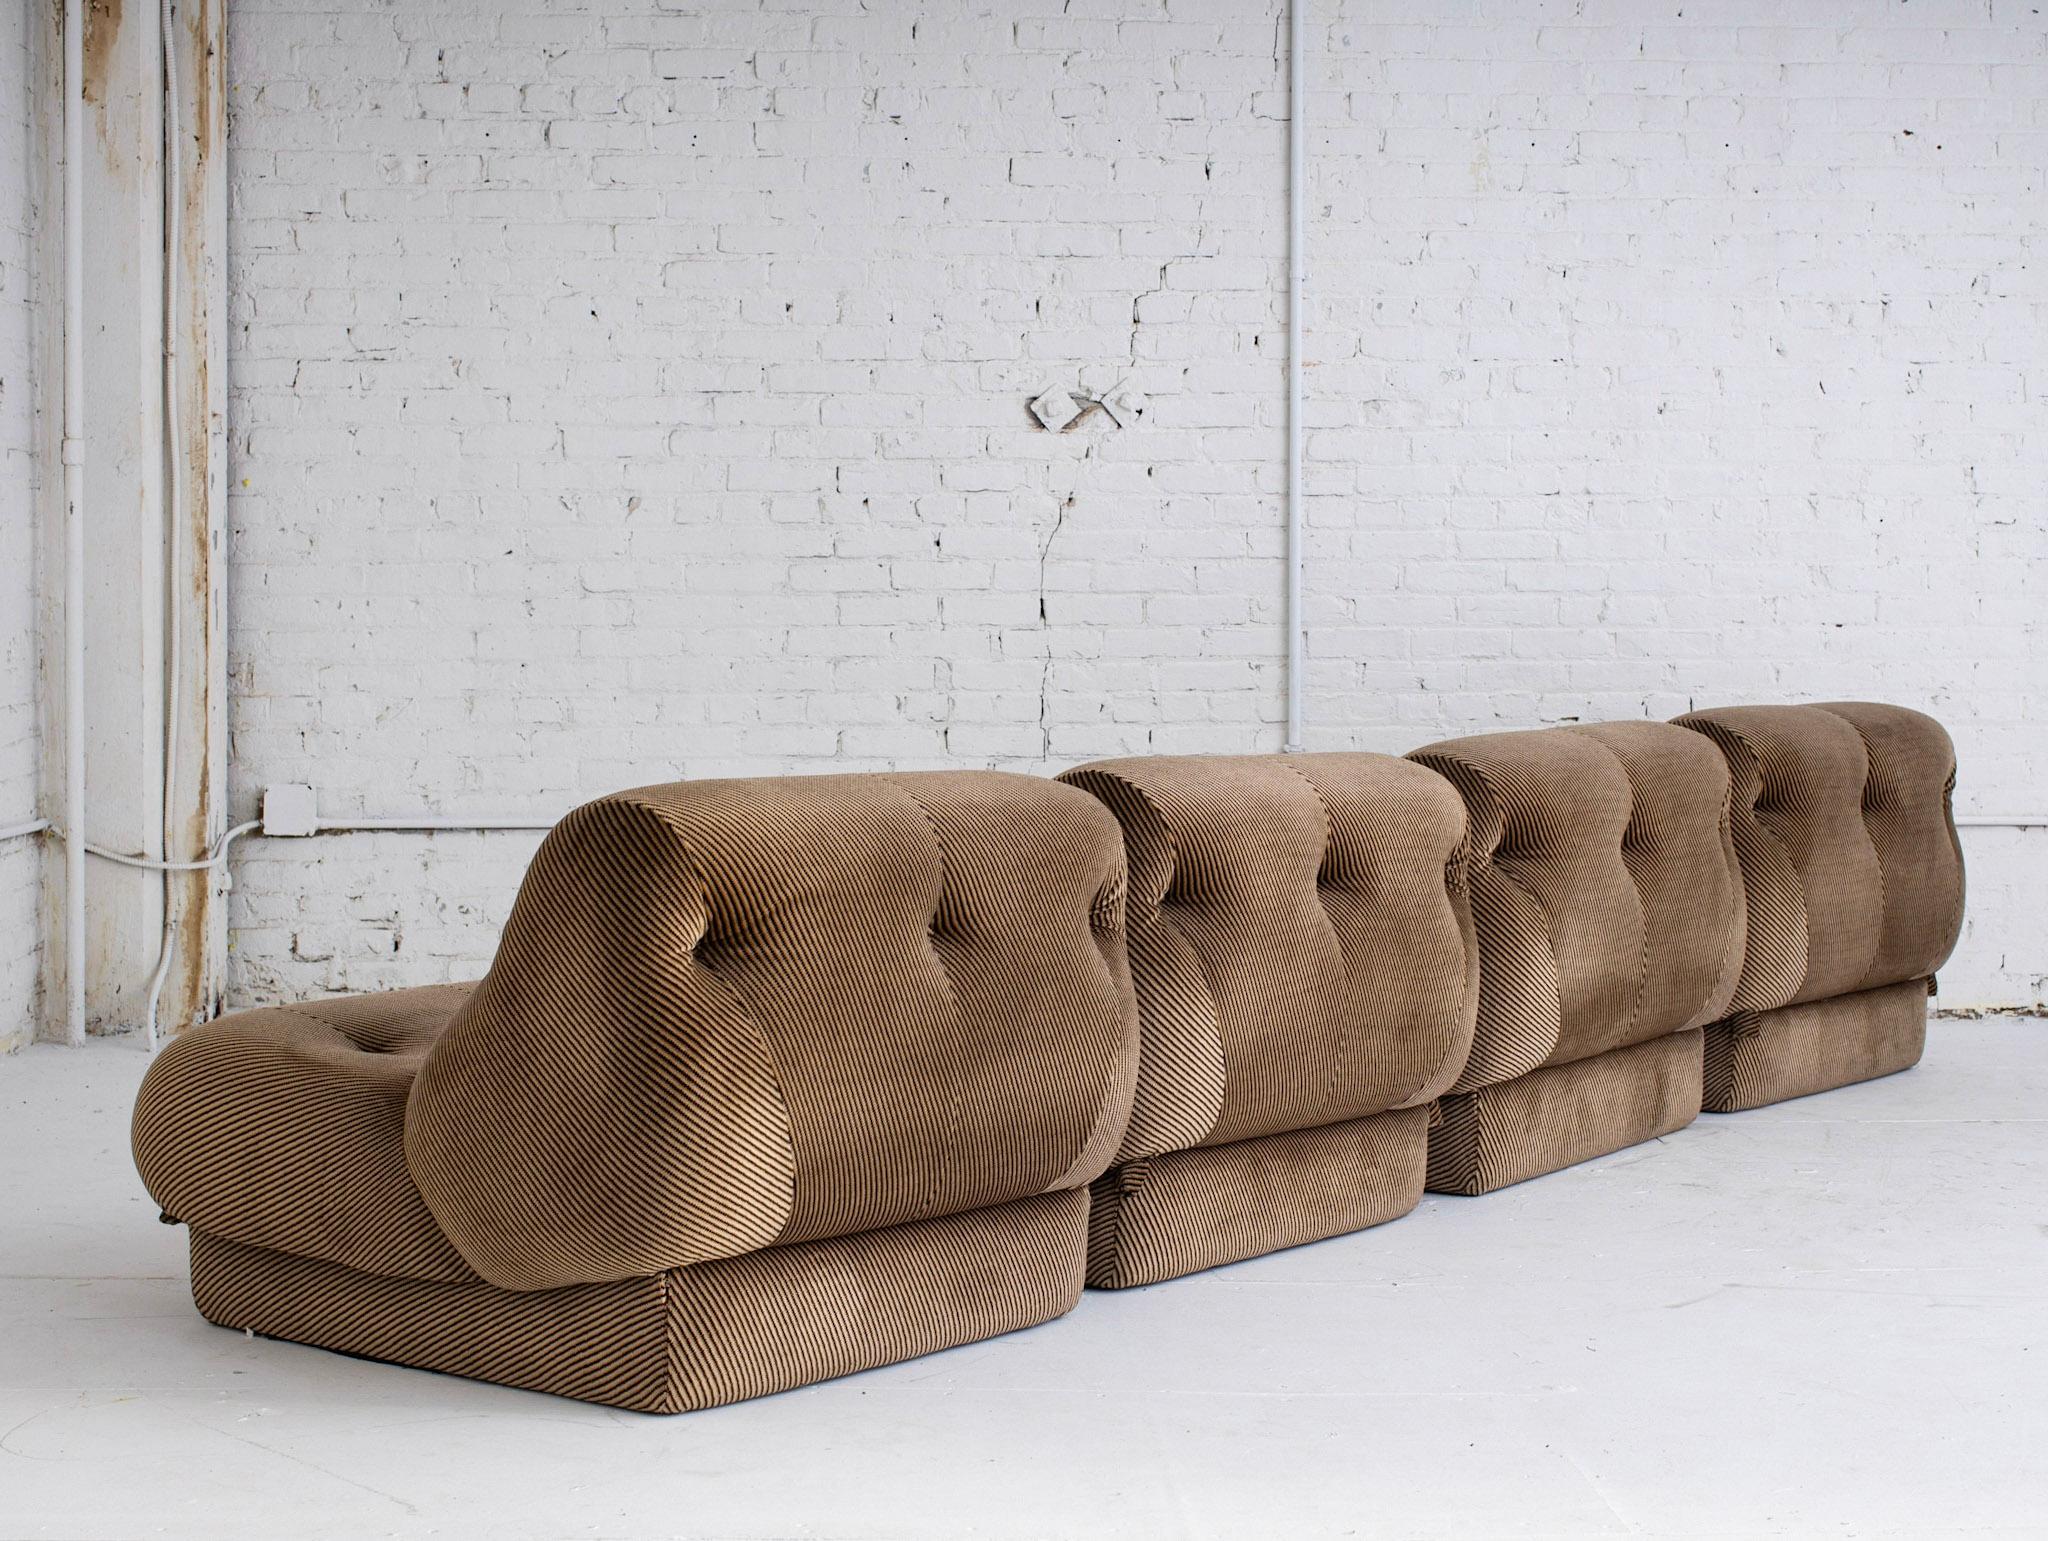 20th Century Italian 4 Piece Modular Sectional Attributed to Rino Maturi for Mimo Leone and C